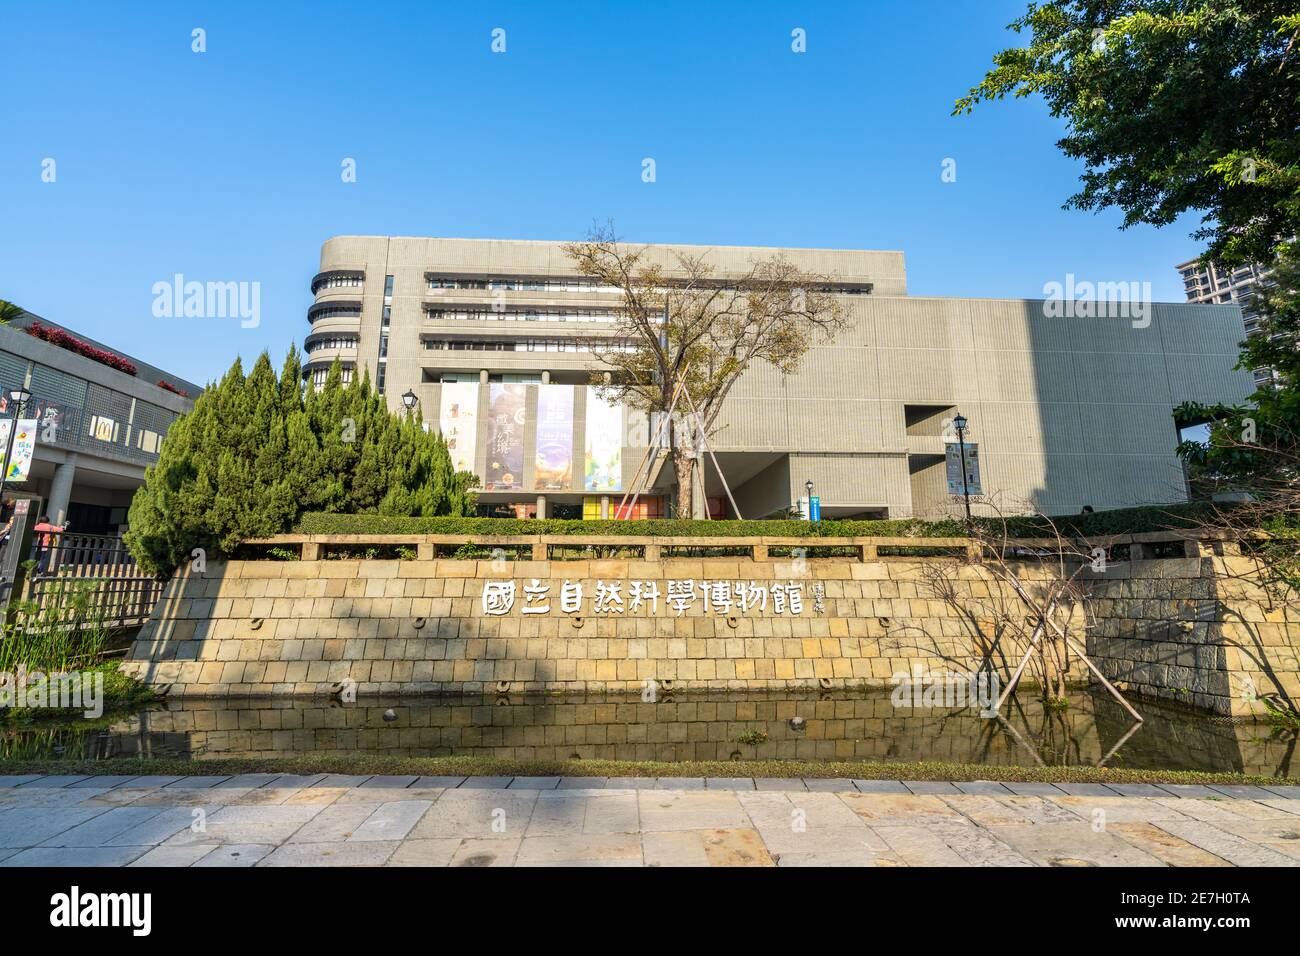 National Museum of Natural Science. A national museum in North District, Taichung City. Taiwan. Stock Photo